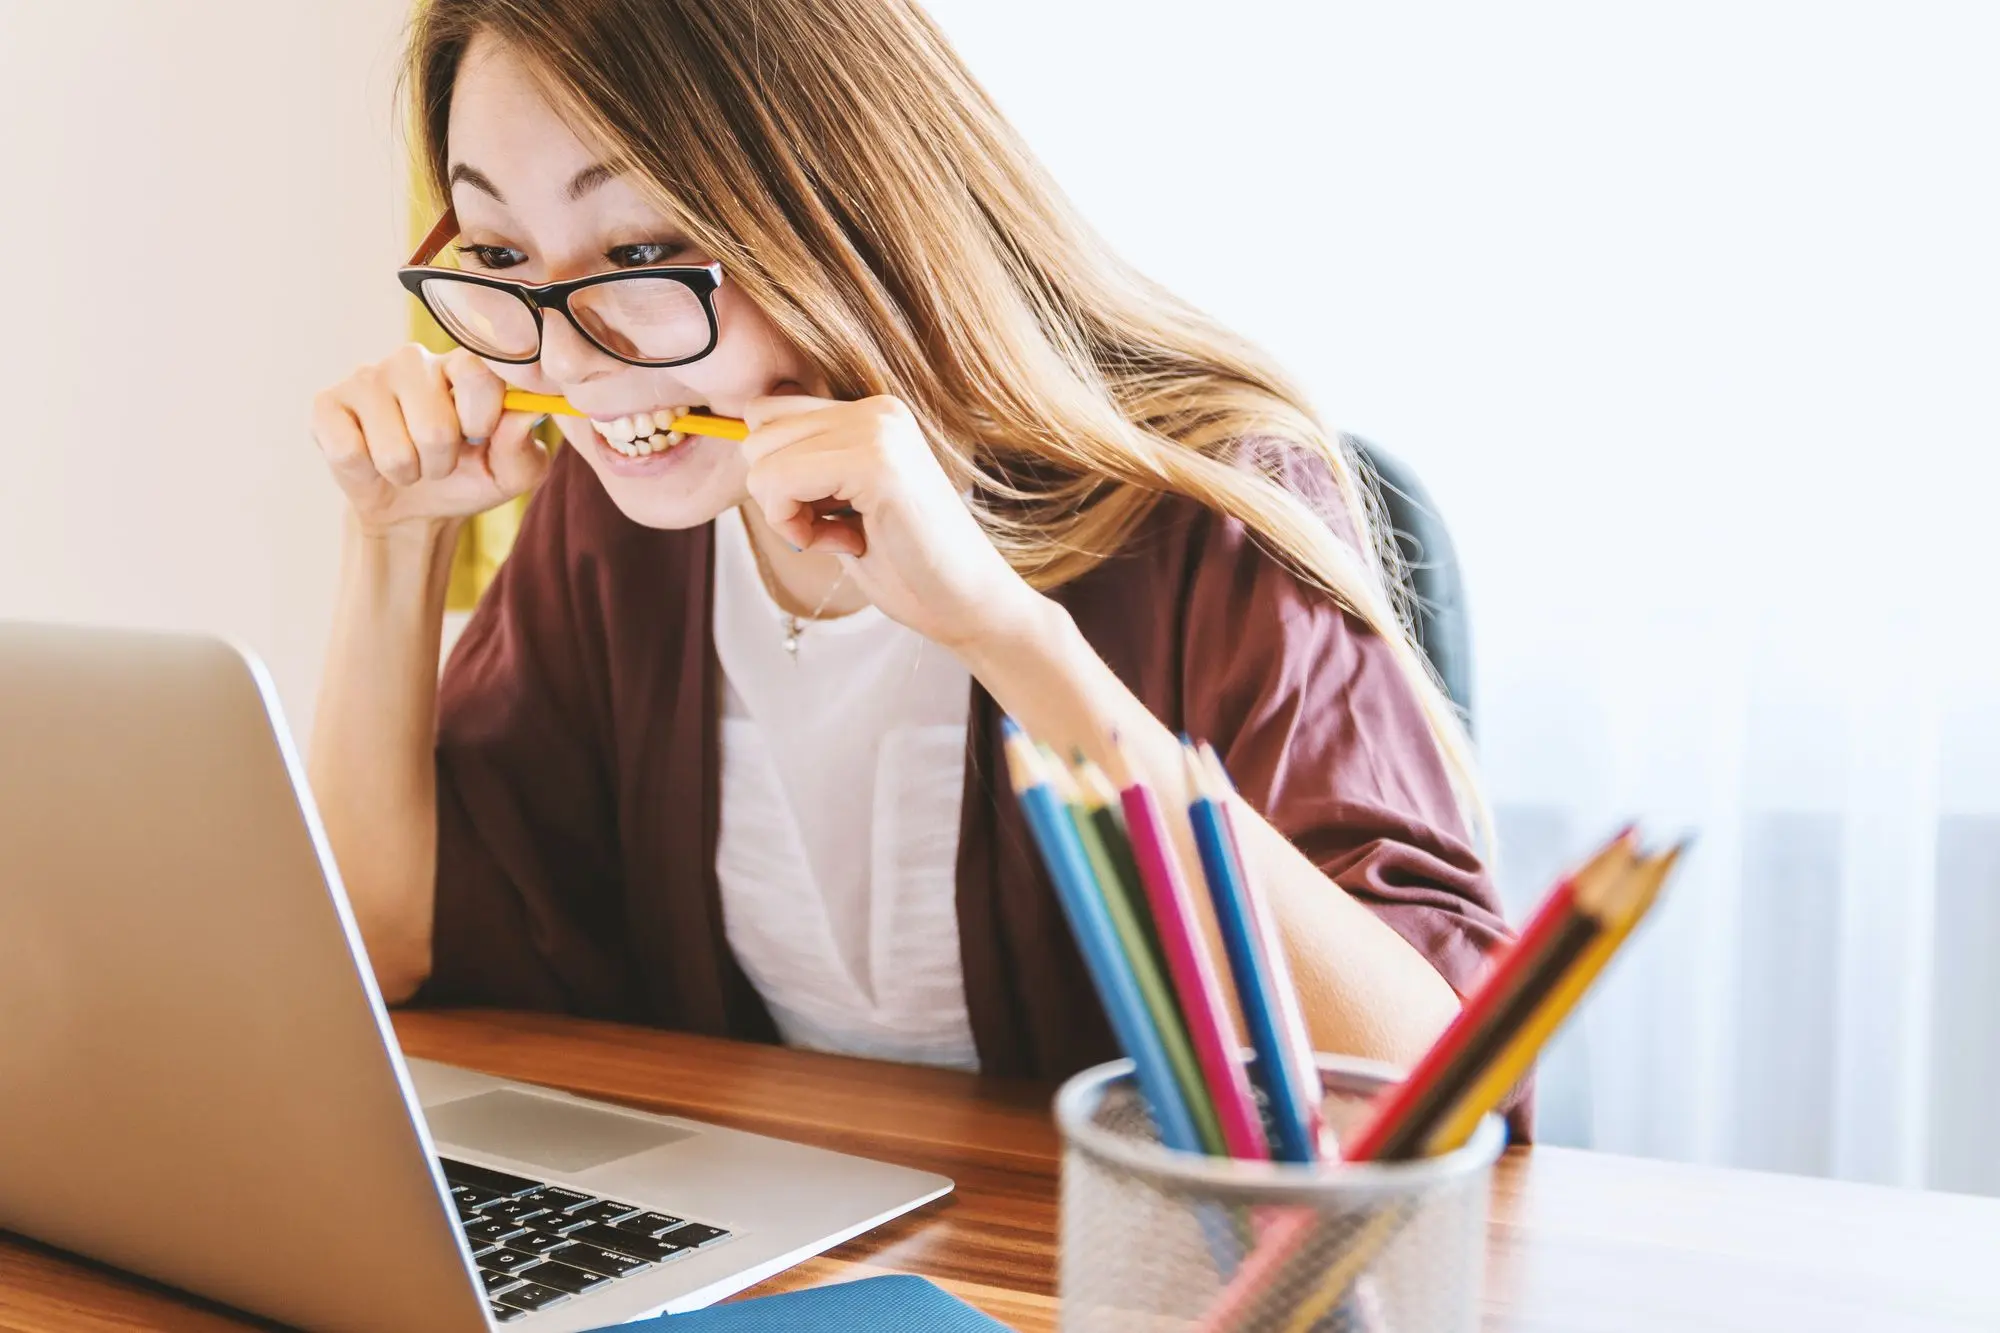 Woman biting a pencil during remote work